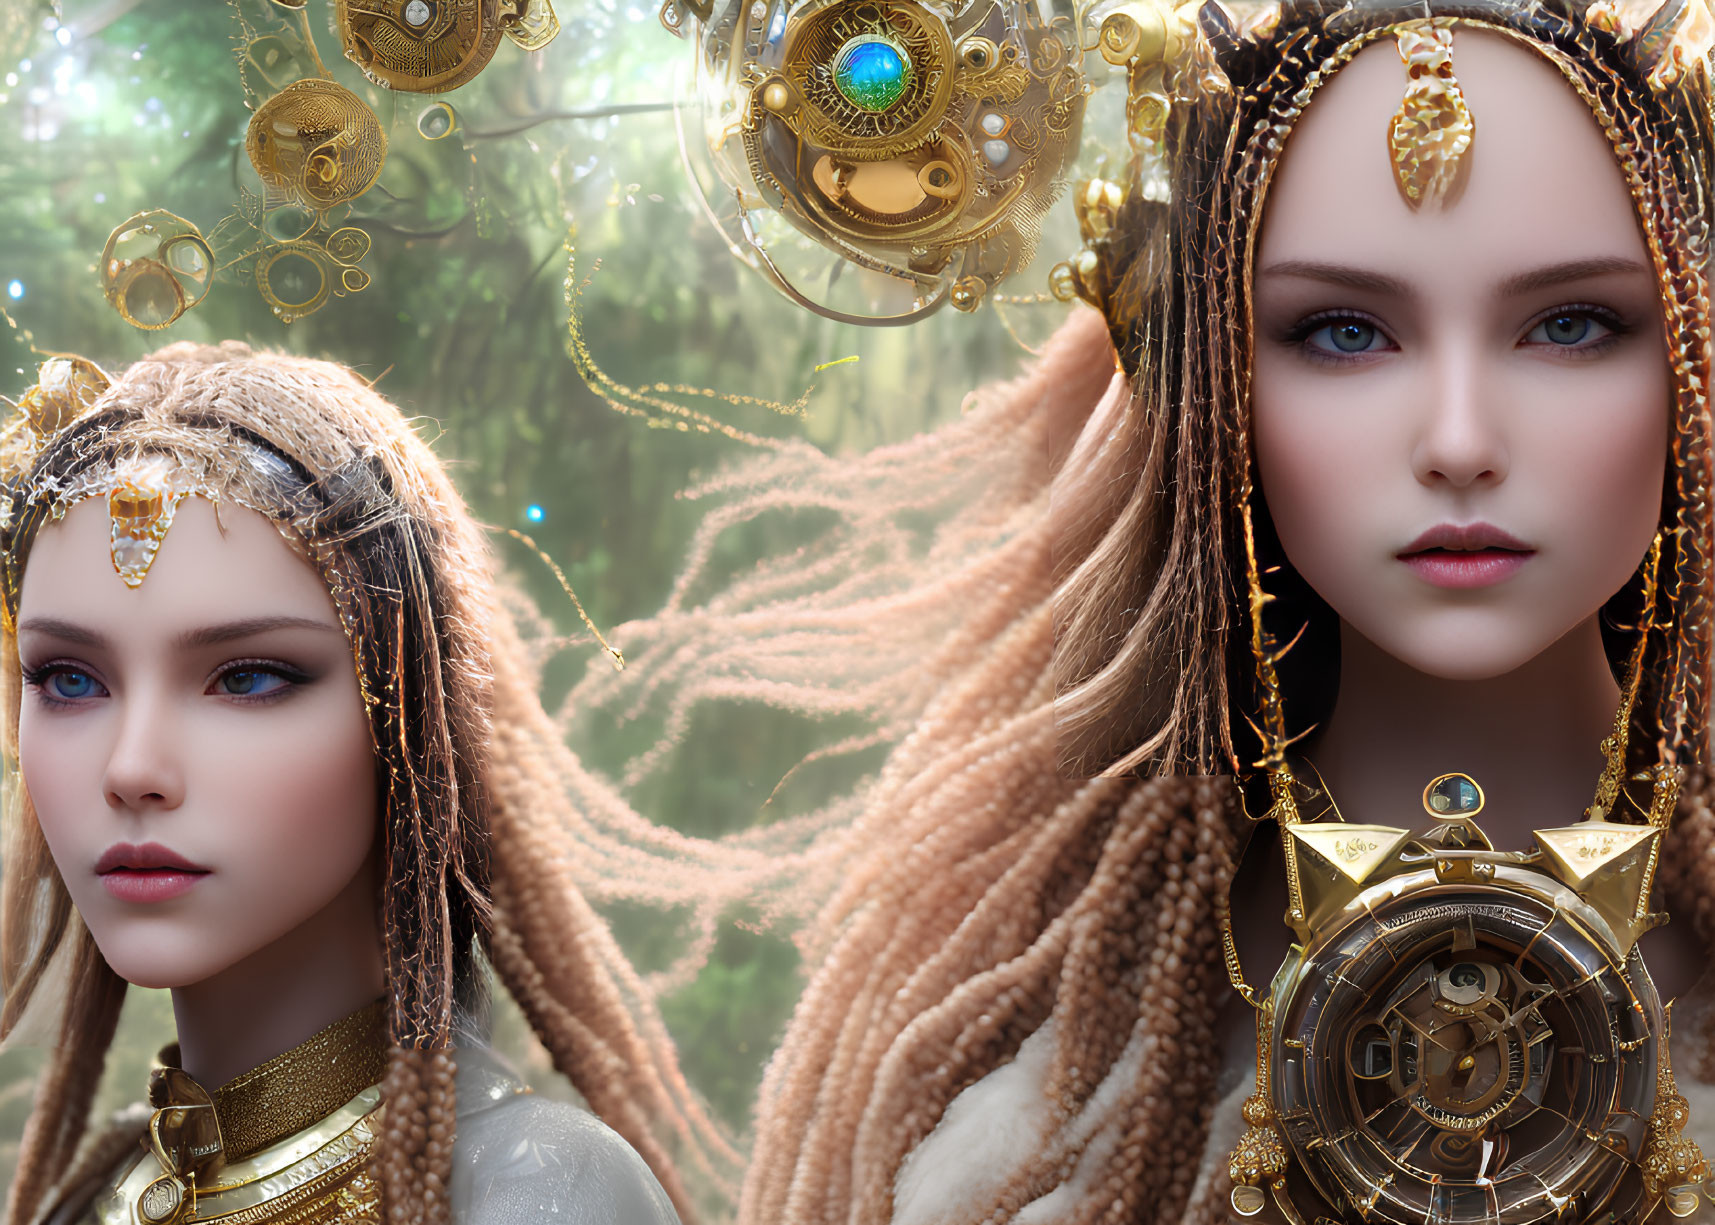 Digital Artwork: Two Female Figures with Golden Headpieces in Mystical Forest